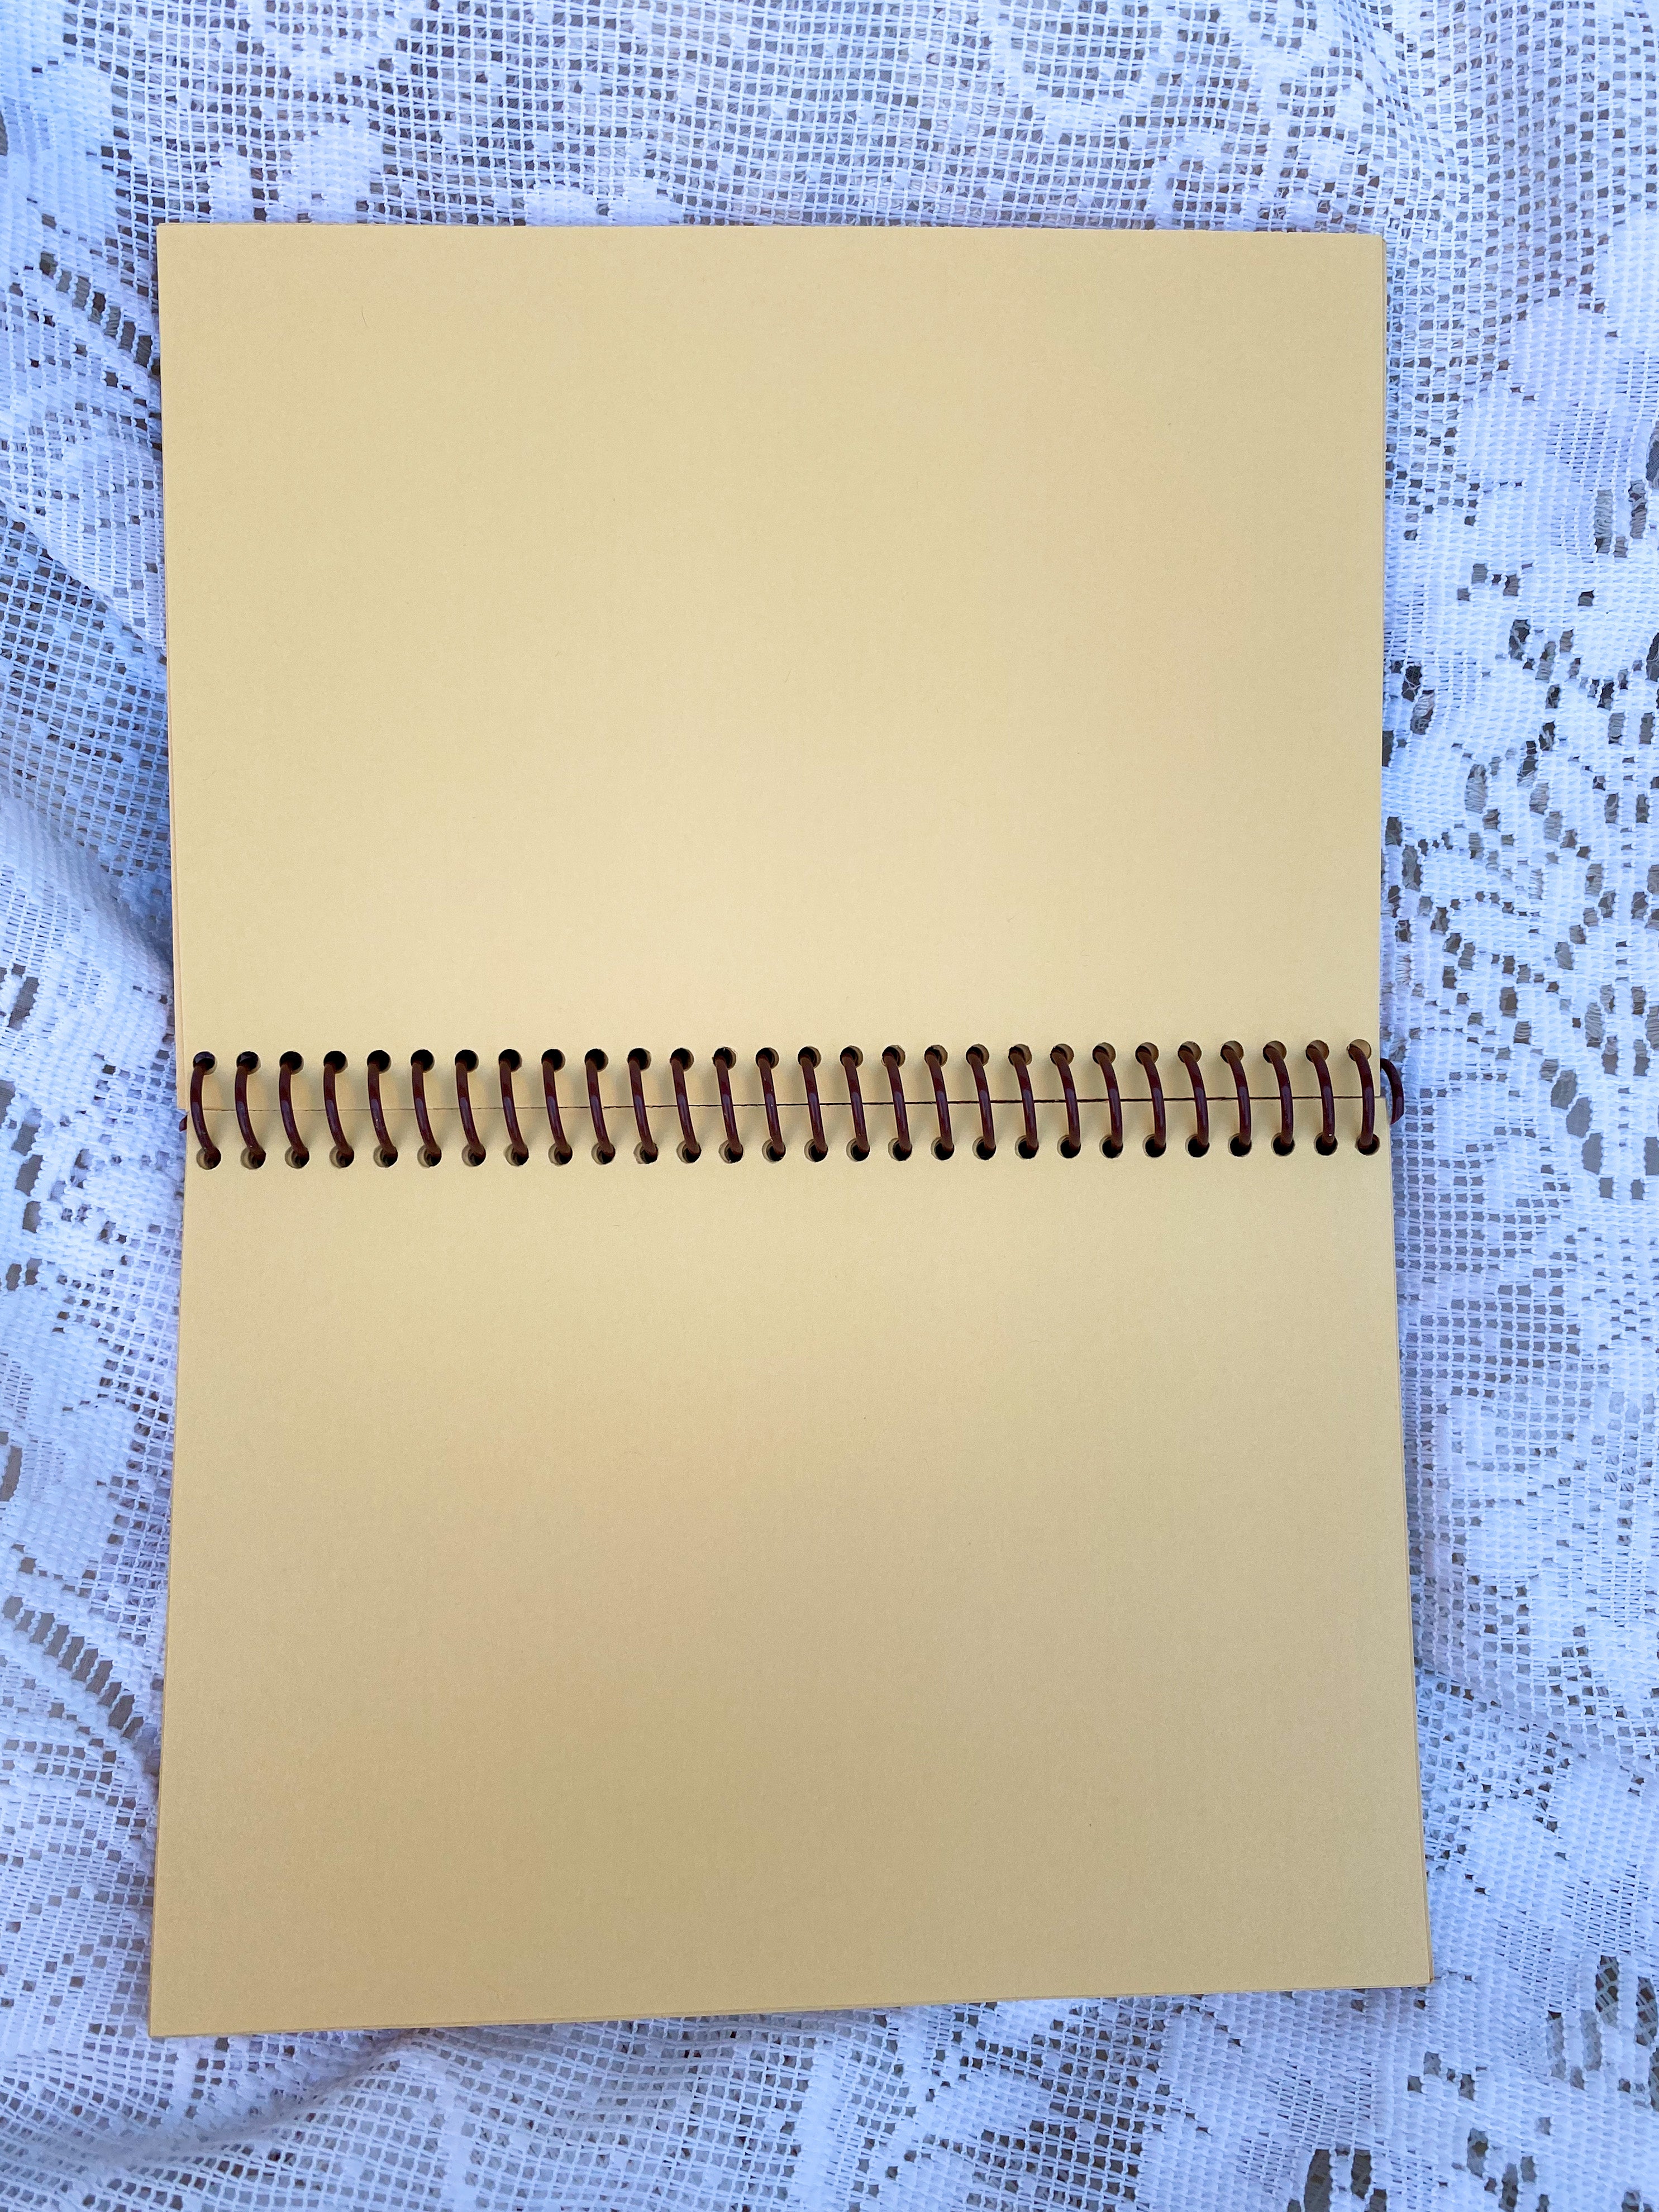 Amy’s Organic Enchiladas Recycled Notebook - Brown Spiral